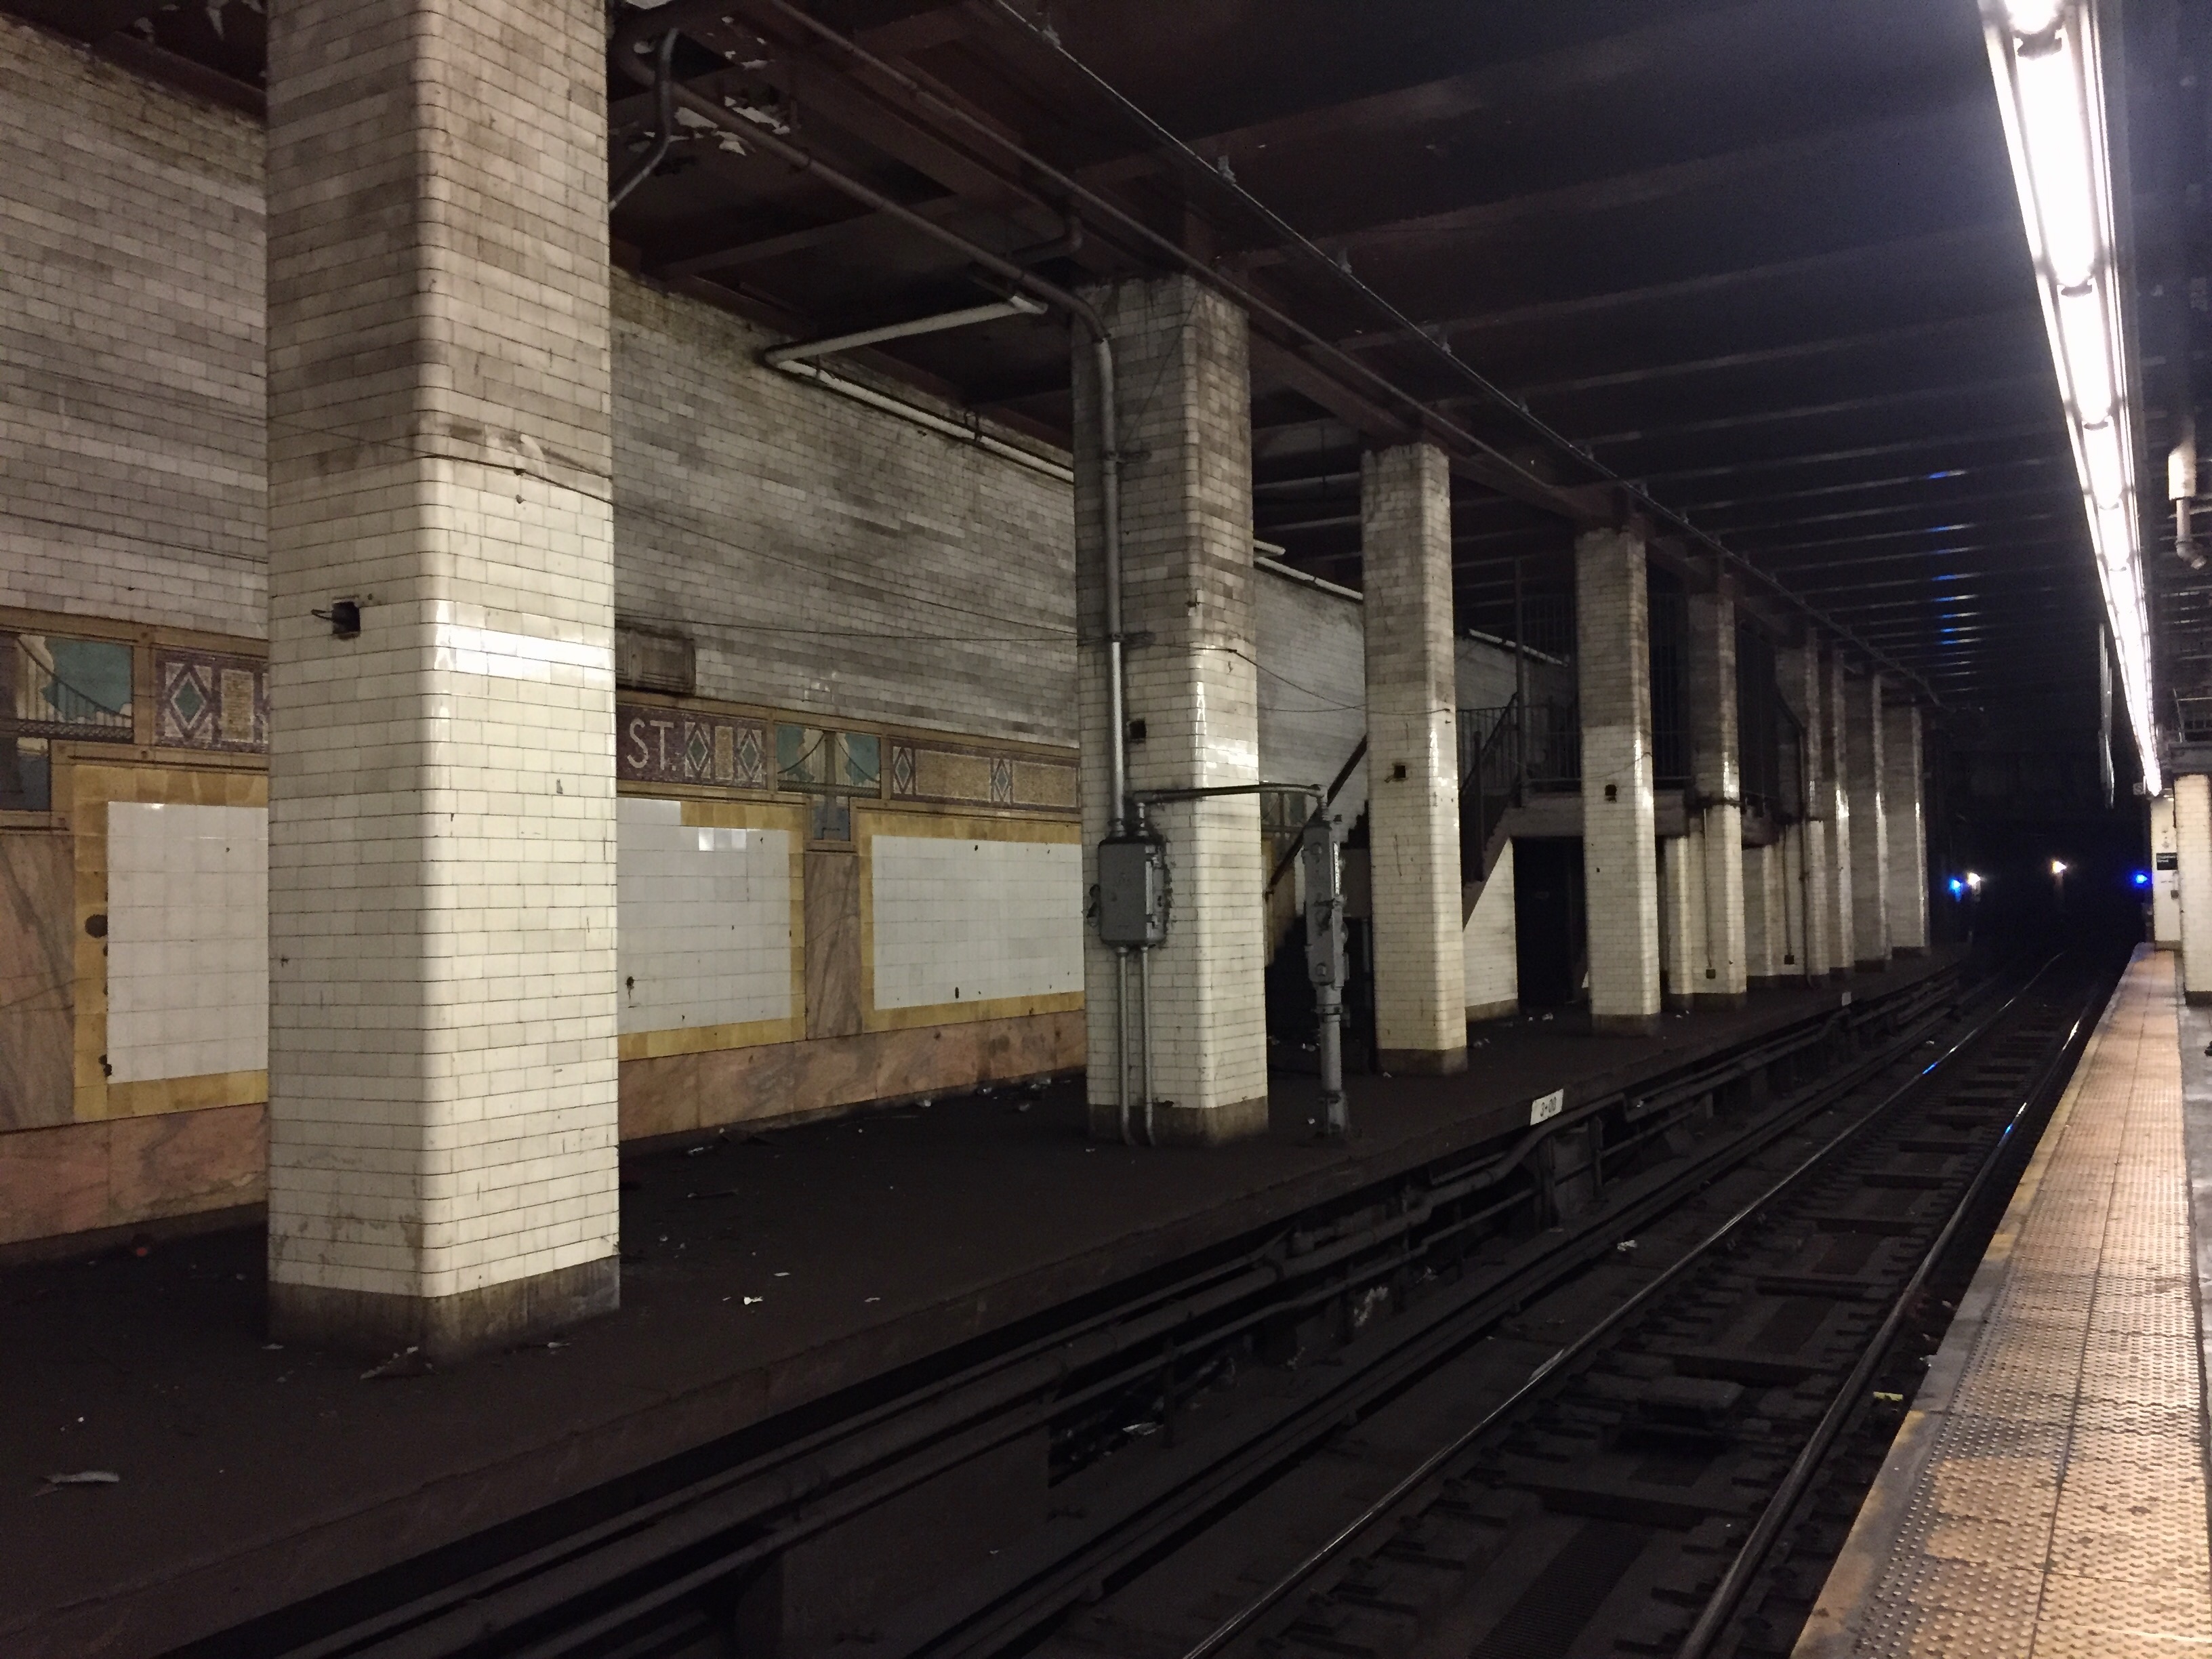 The once opulent station of Chambers Street is now full of eerily deserted tunnels.